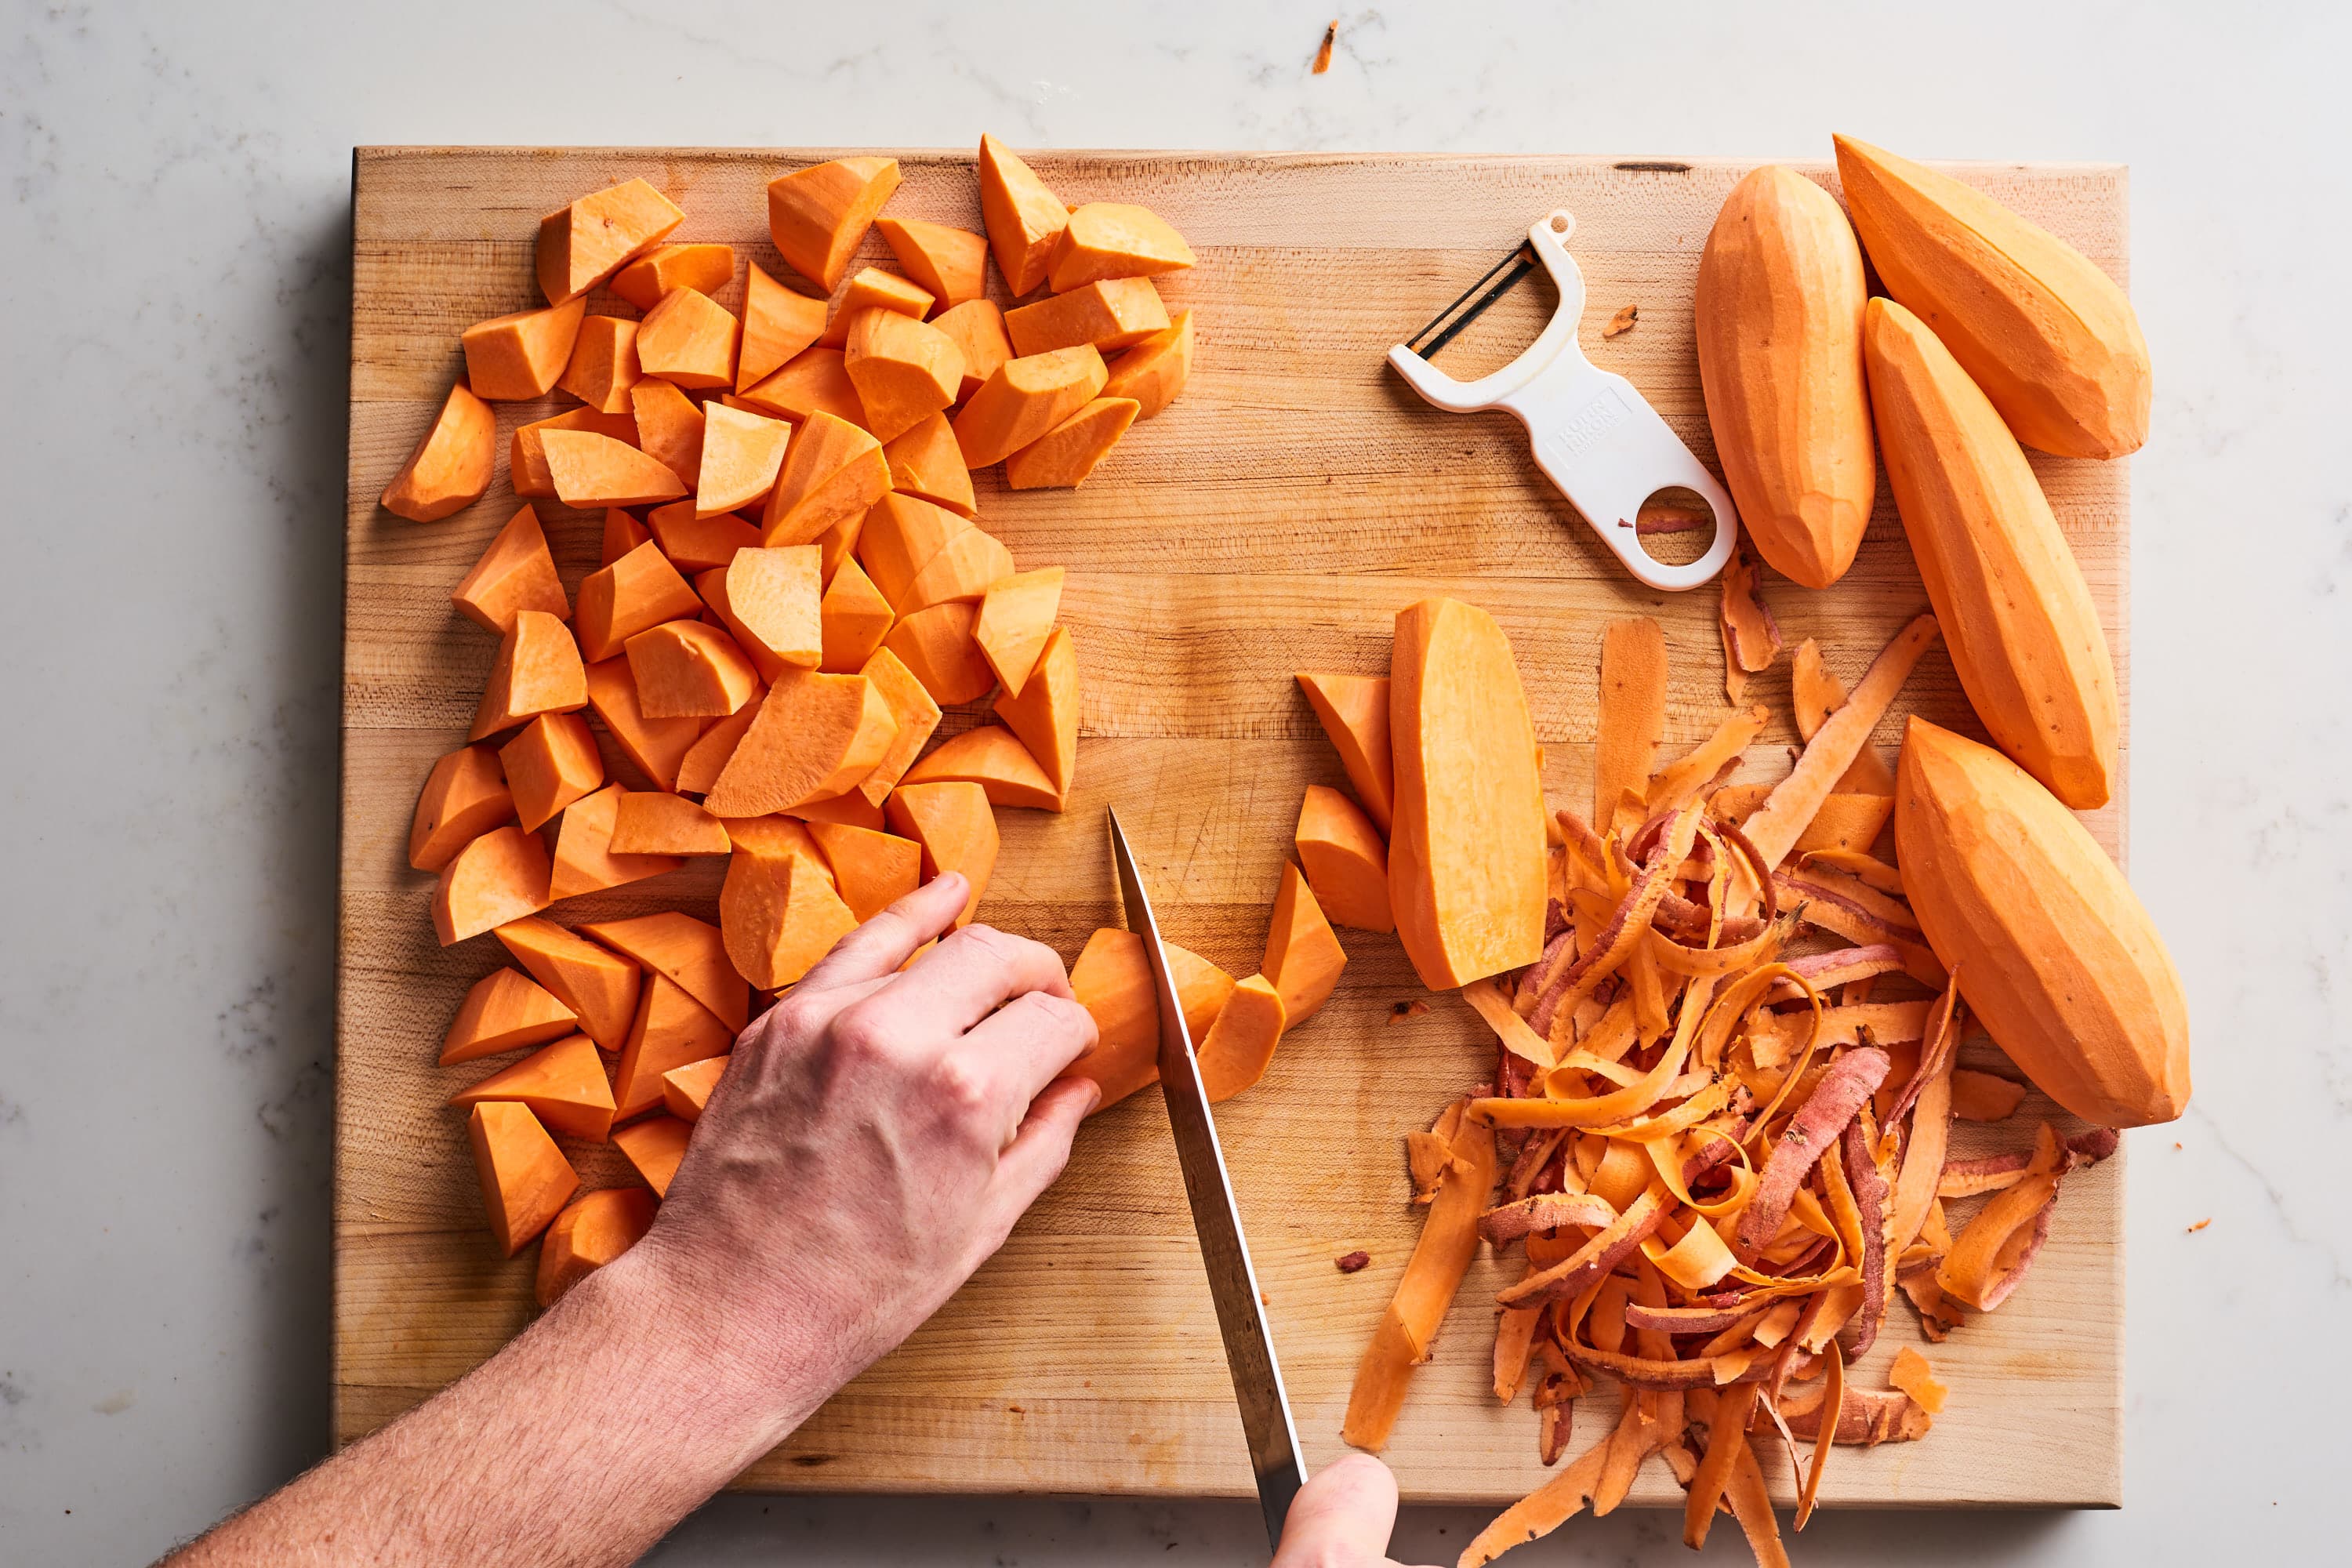 https://cdn.apartmenttherapy.info/image/upload/v1572034044/k/Photo/Recipes/2019-11-how-to-mashed-sweet-potatoes/2019-10-21_Kitchn88296_HT-Best-Mashed-Sweet-Potatoes.jpg